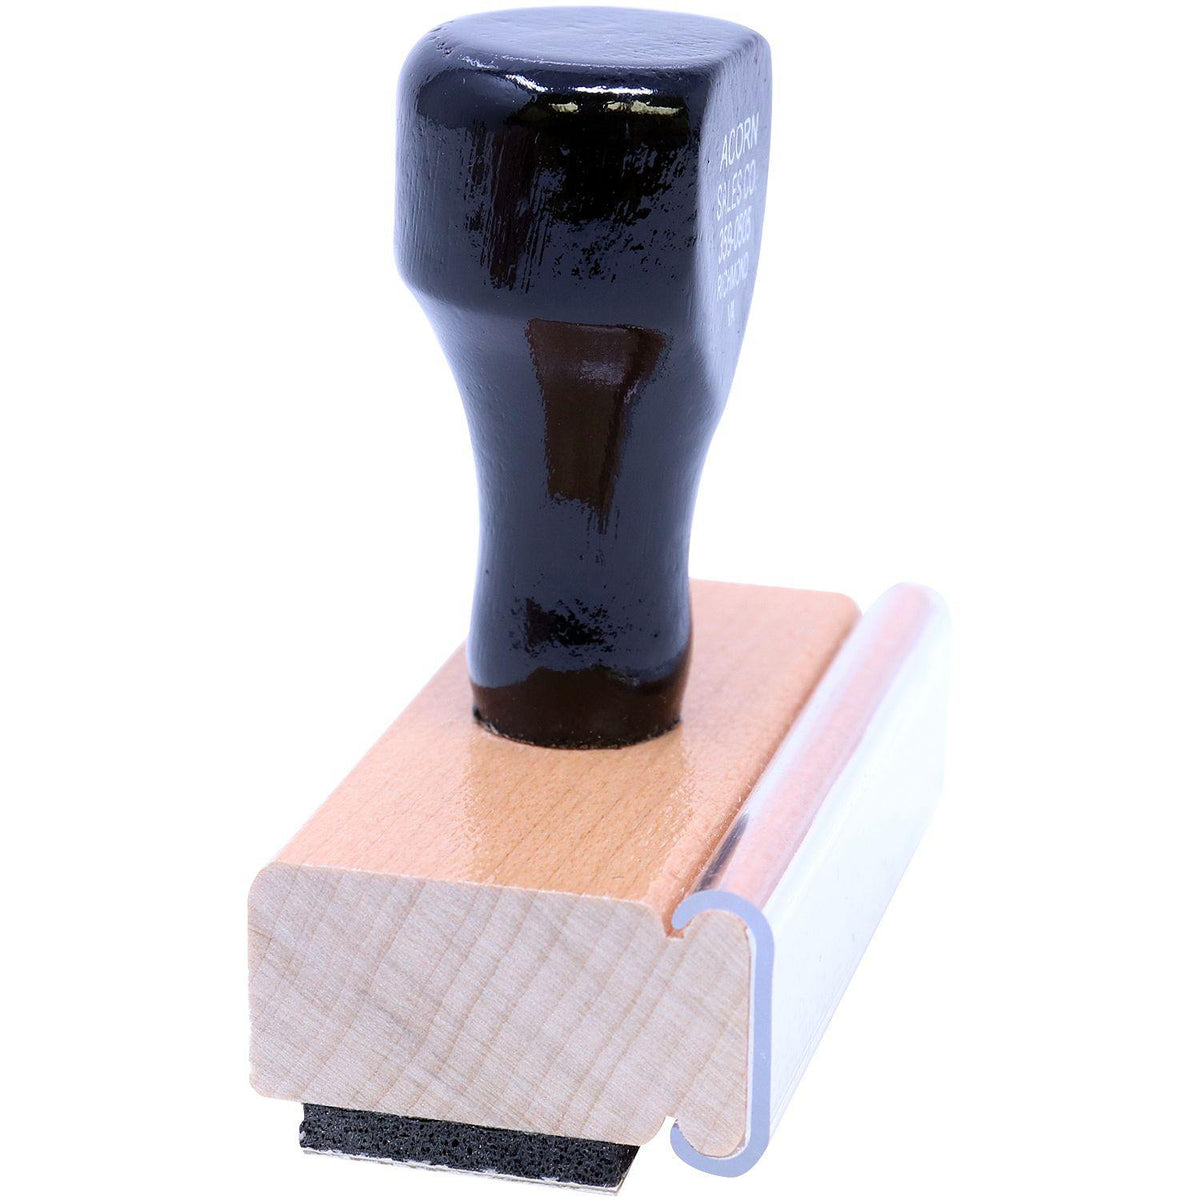 Side View of Standard Mail Rubber Stamp at an Angle